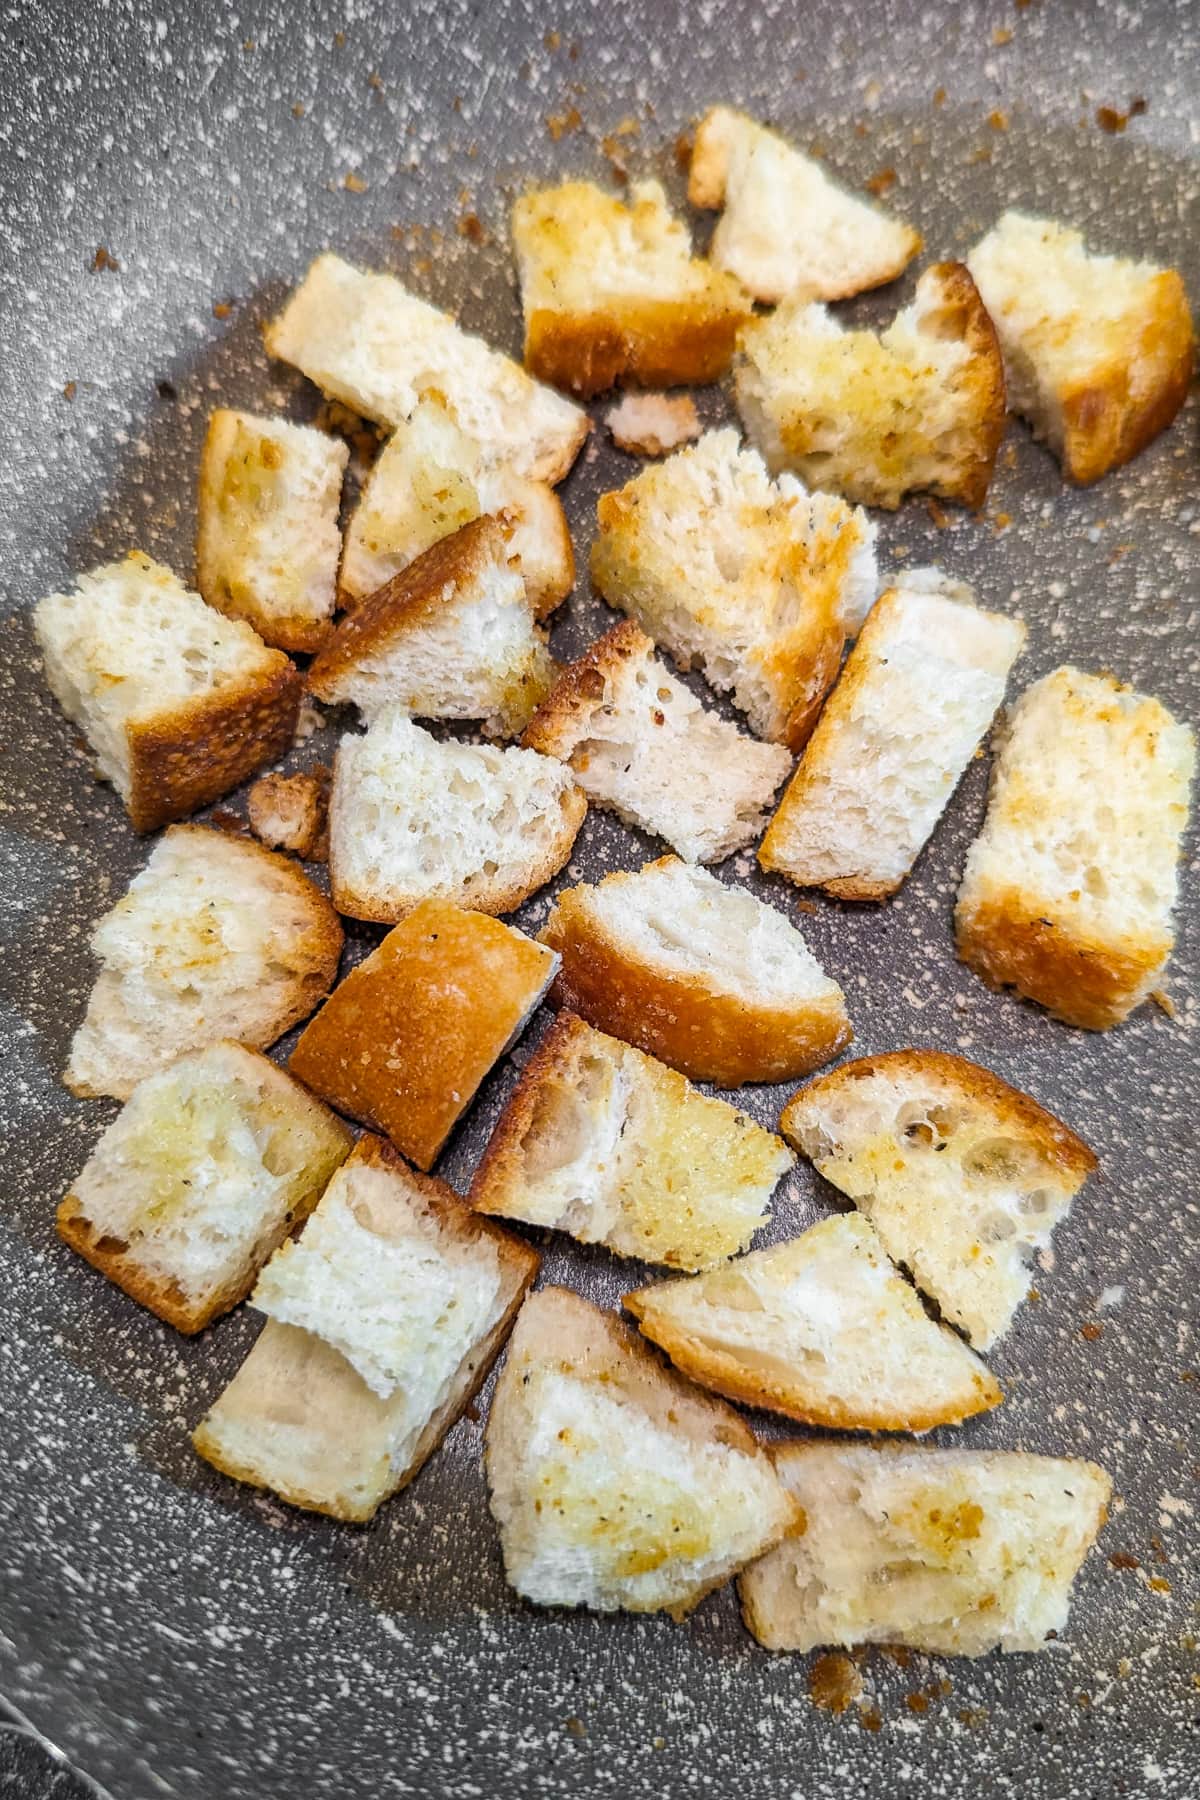 Frying pan with roasted croutons on the stove.